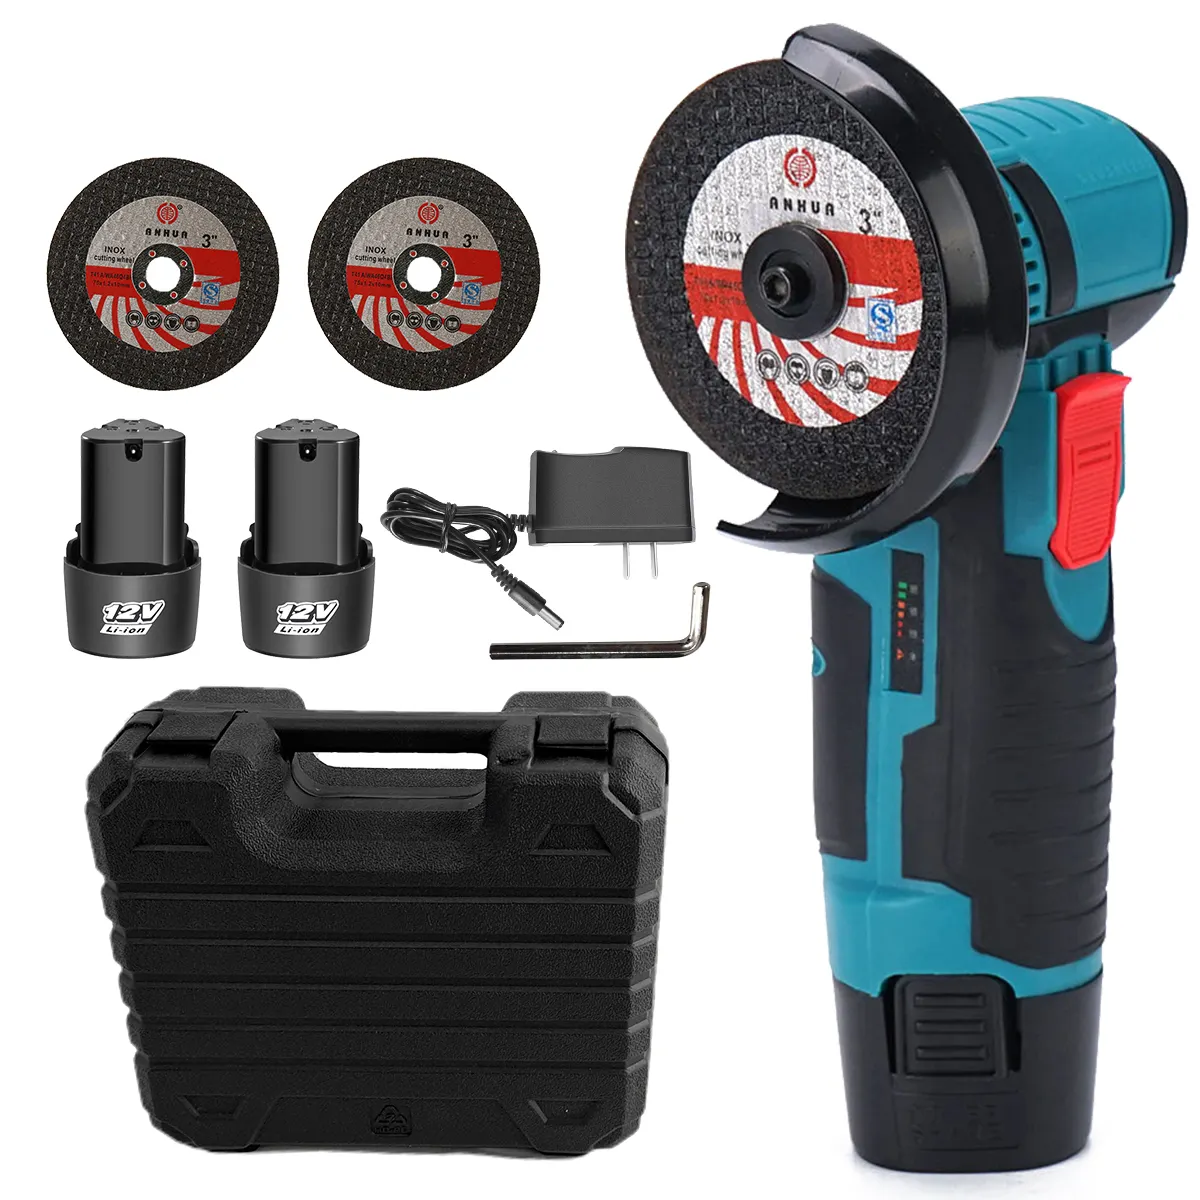 High Quality Best Price 16.8v Small Portable Cordless Brushless Electric Angle Grinder